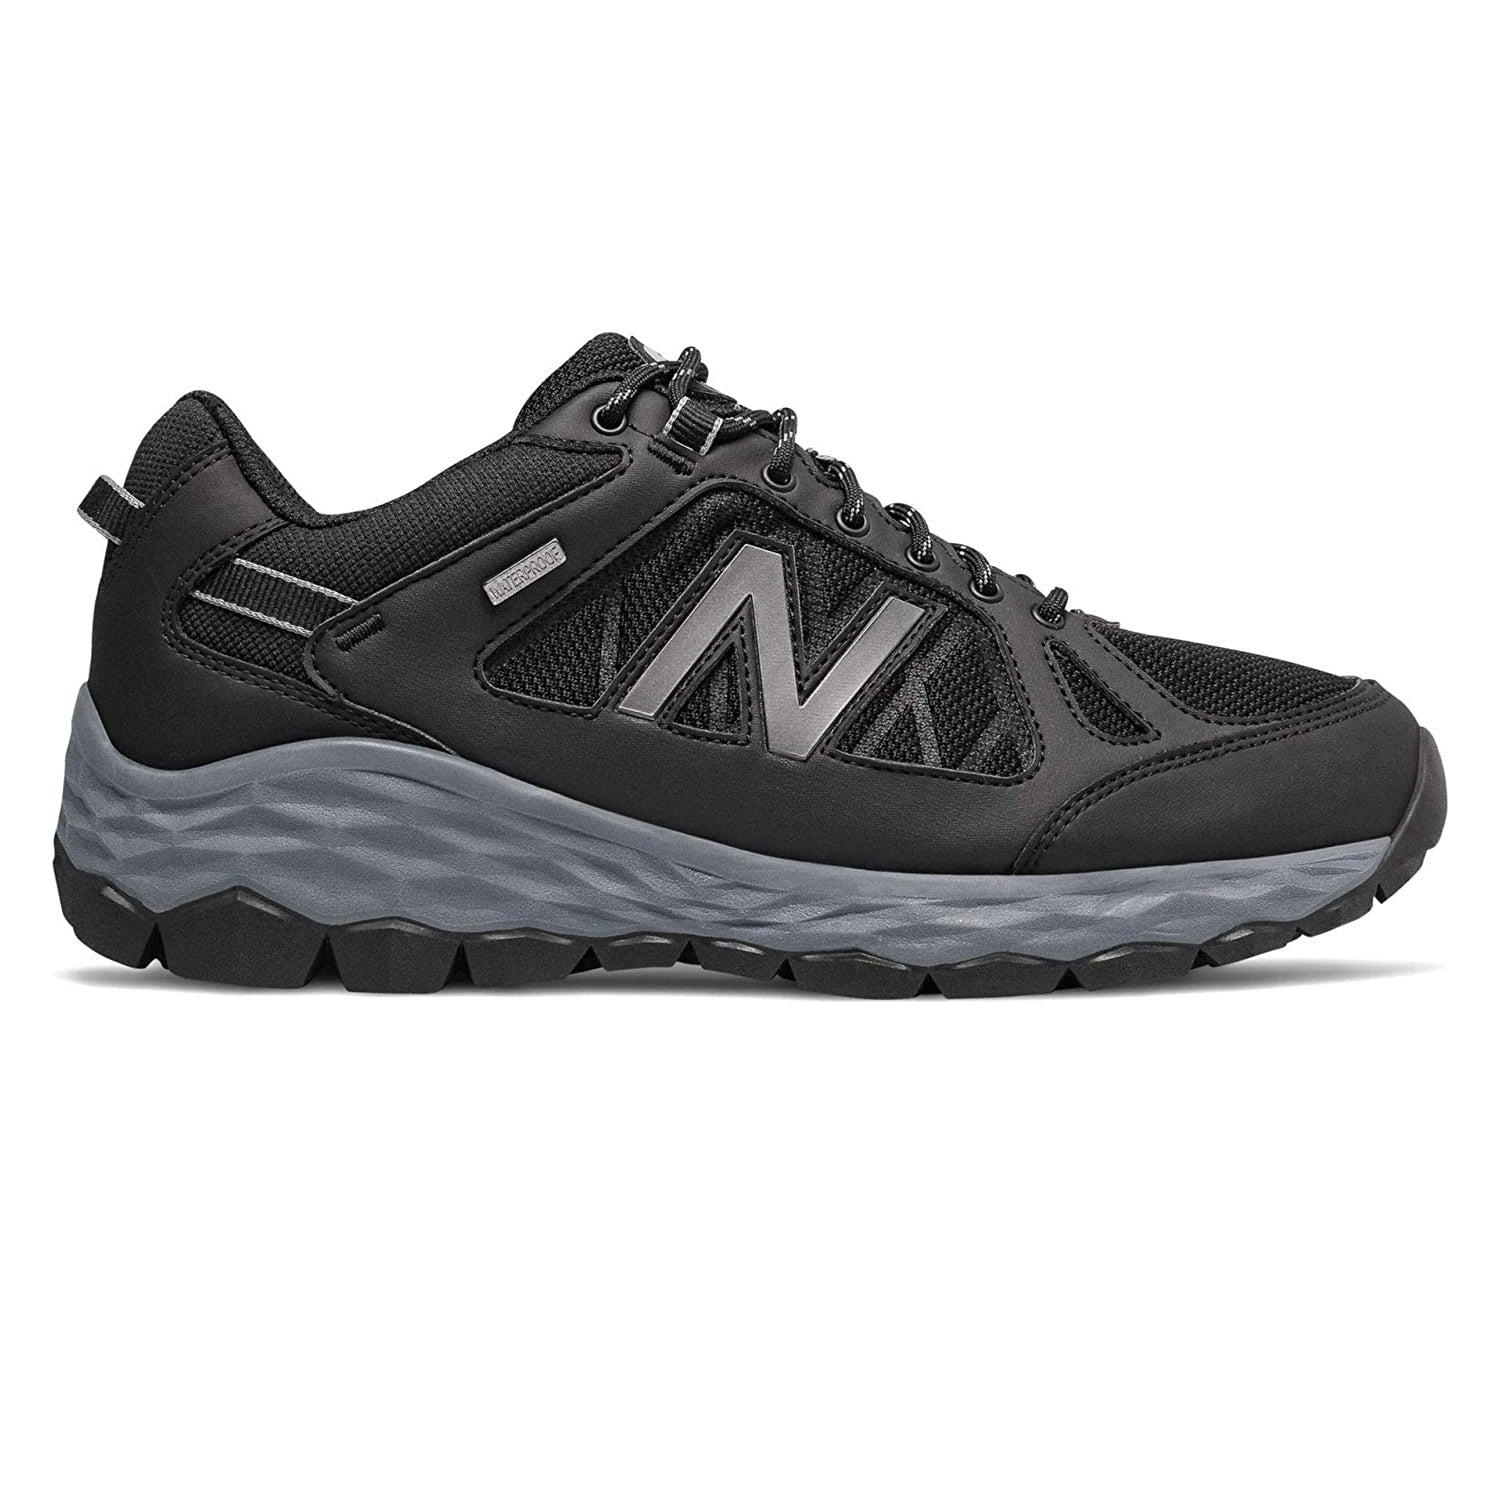 New Balance Synthetic S Wide Fit Waterproof Mw1350wl Trainers in Black &  Lead (Black) - Lyst